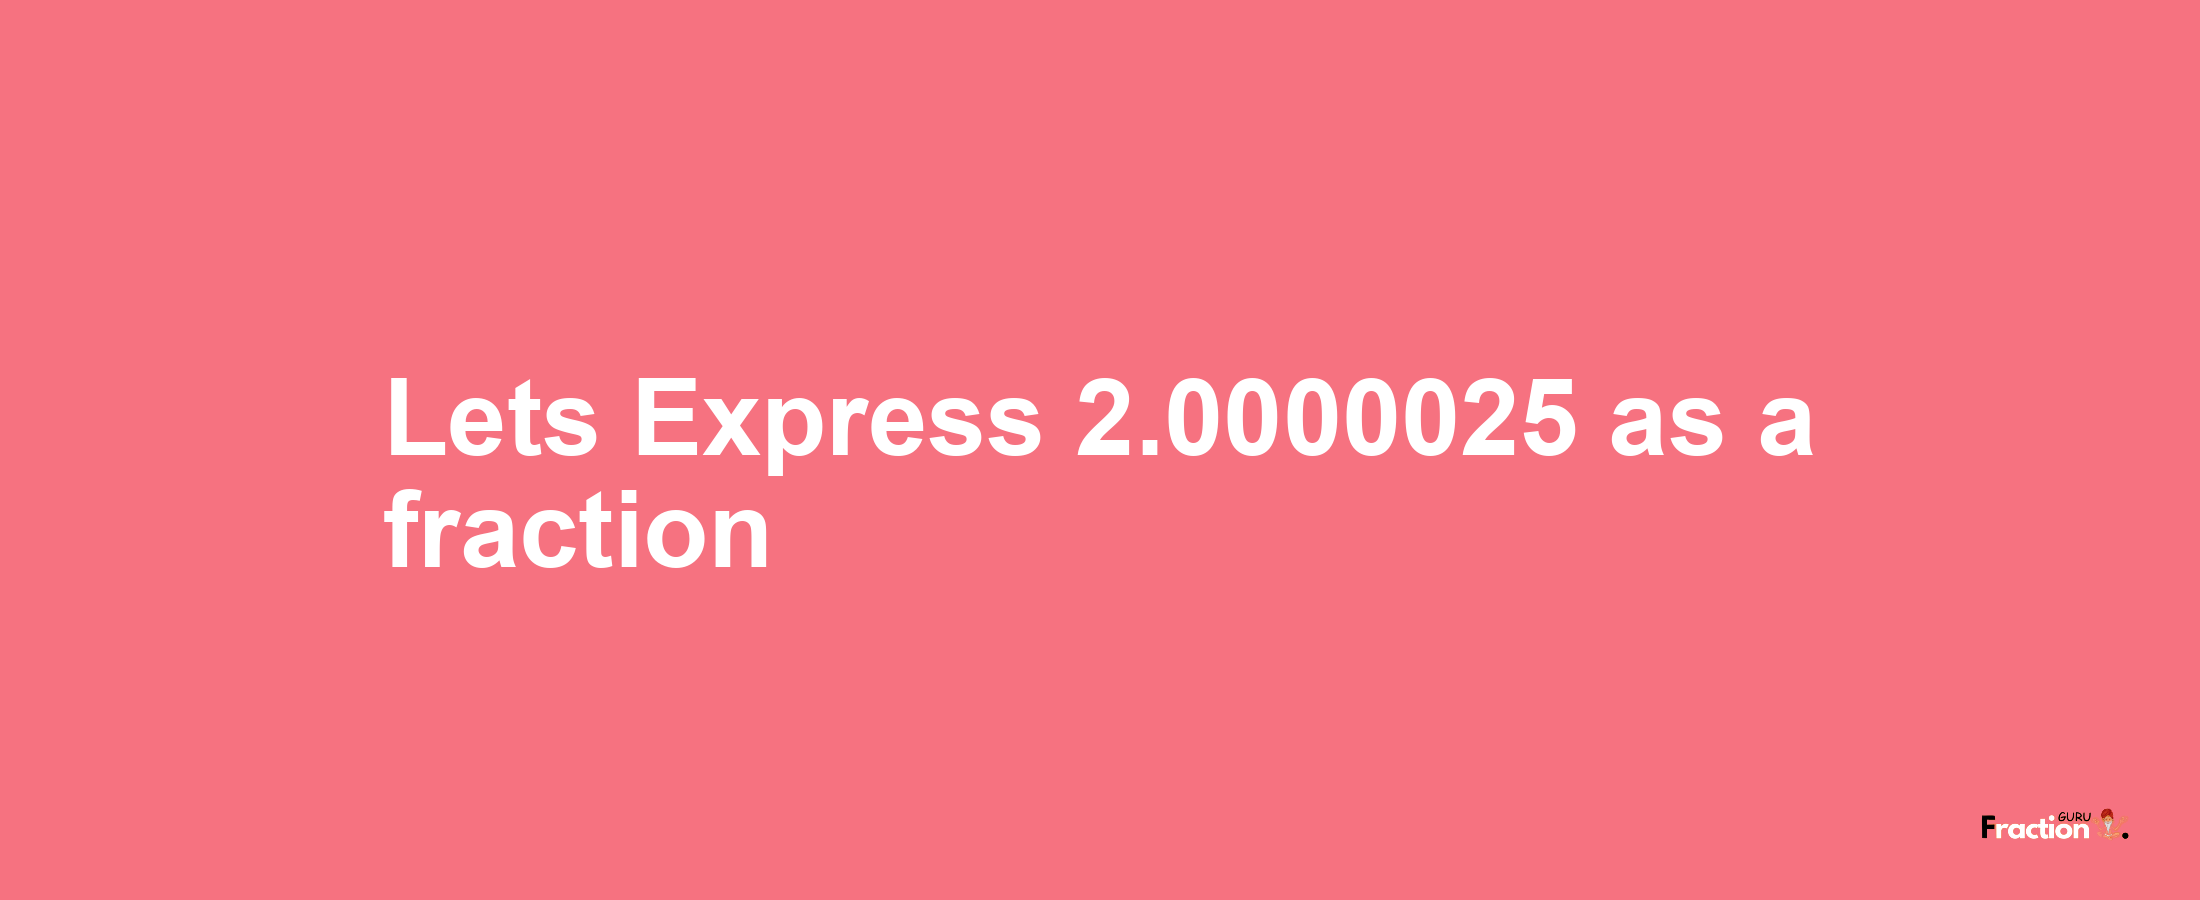 Lets Express 2.0000025 as afraction